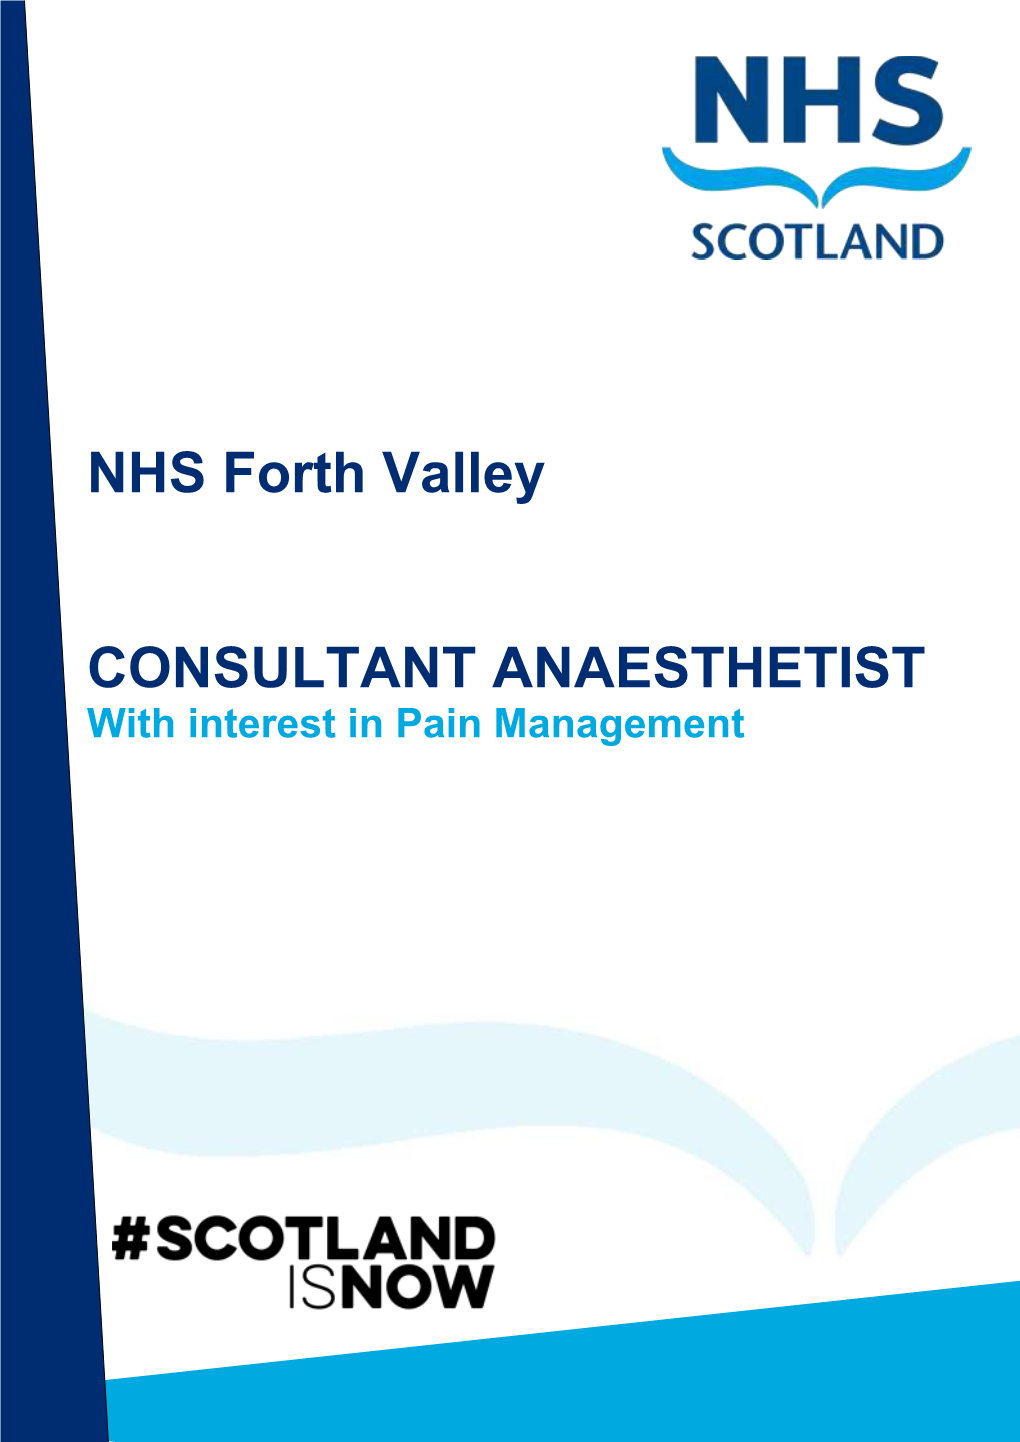 NHS Forth Valley CONSULTANT ANAESTHETIST